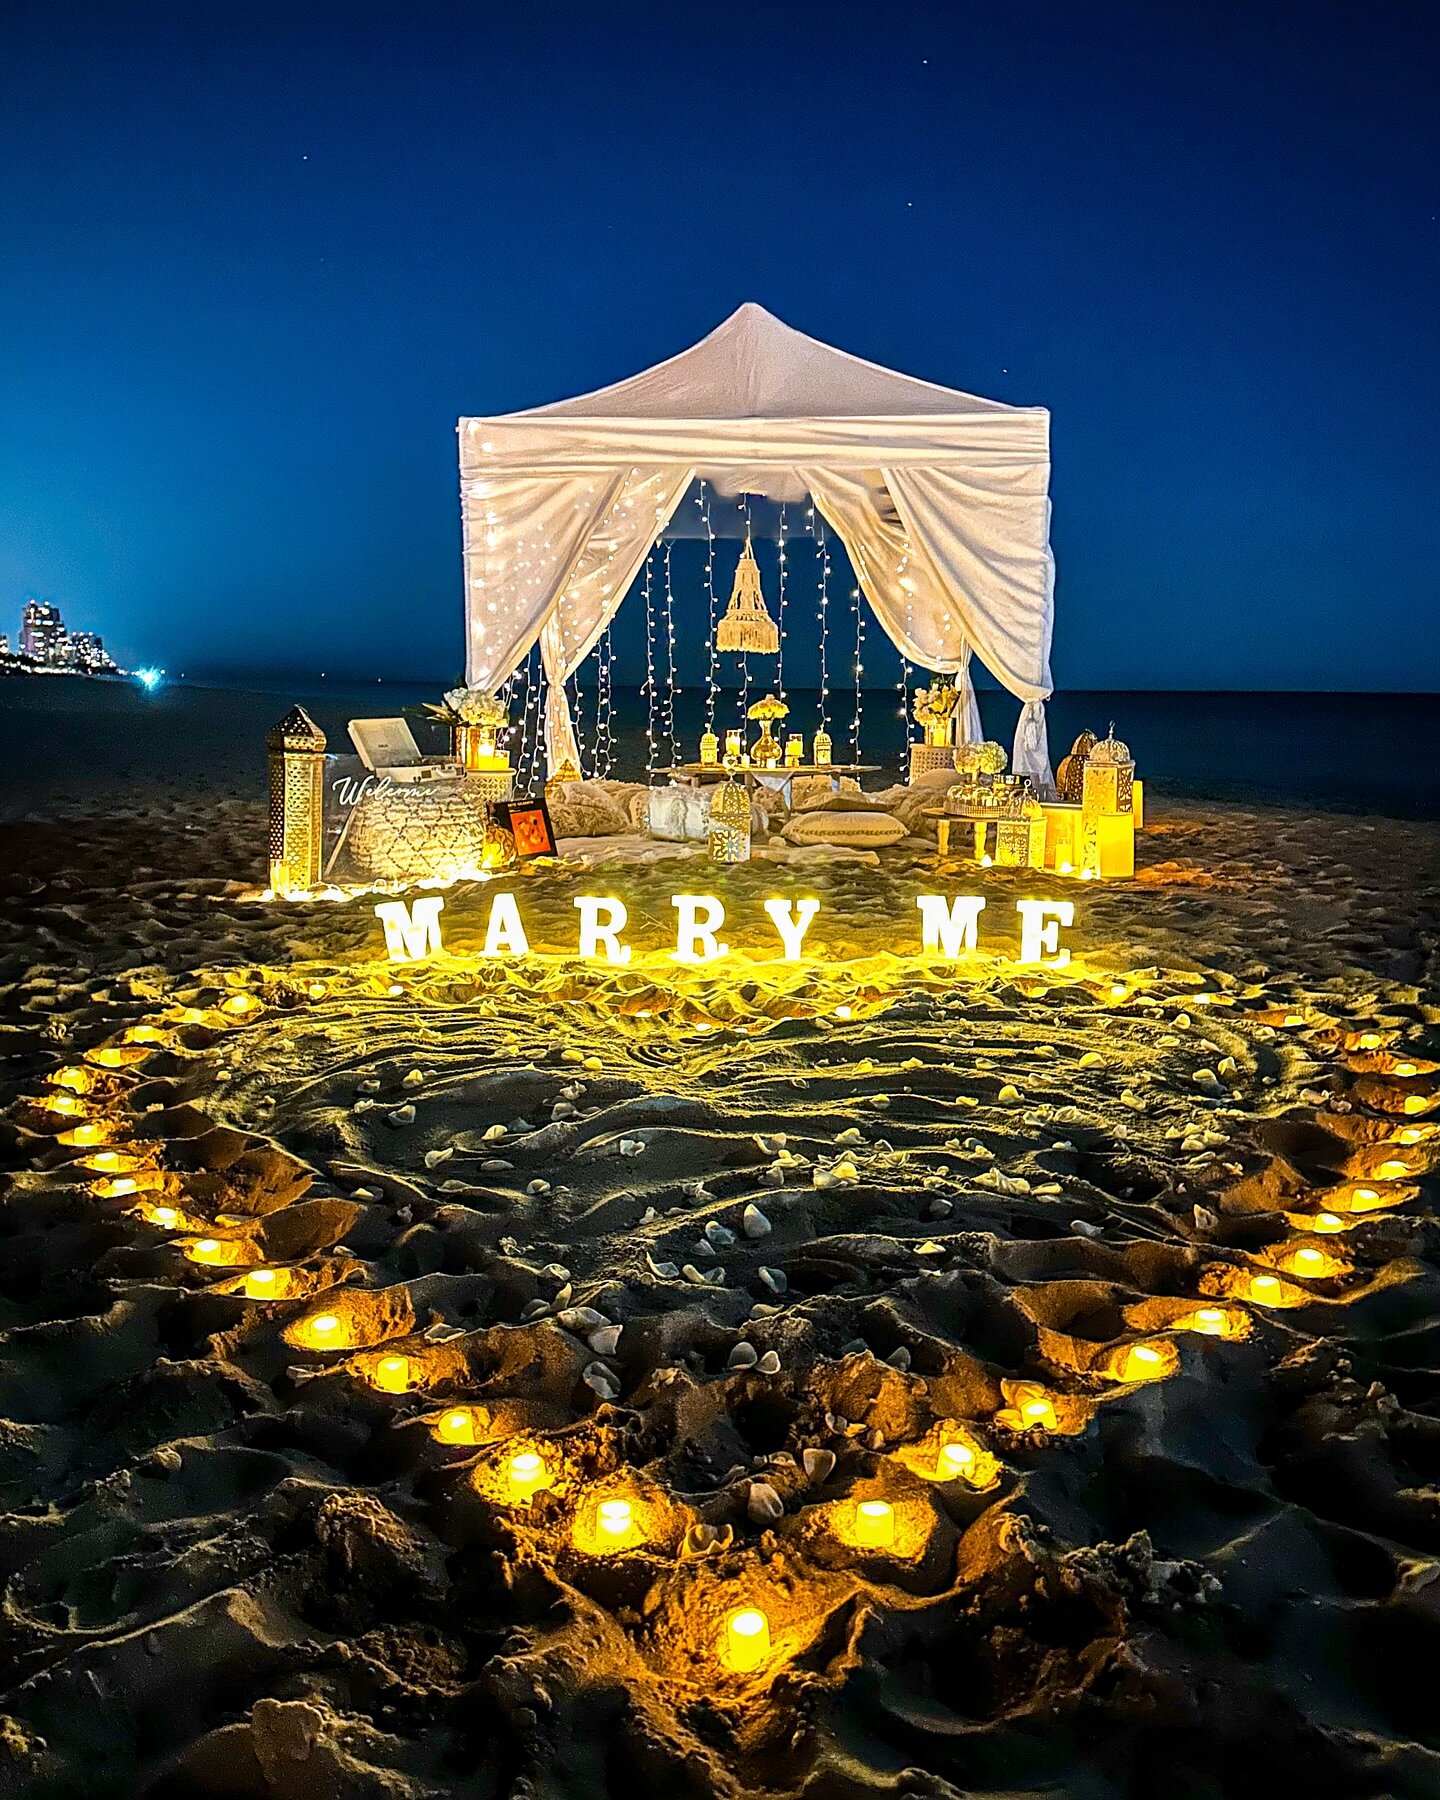 Proposal season feels officially in full swing!:) We had the honor of setting up this surprise proposal on a picture-perfect evening in Fort Lauderdale for a wonderful couple and their closest family and friends. Congratulations! 

PS: Complete with 